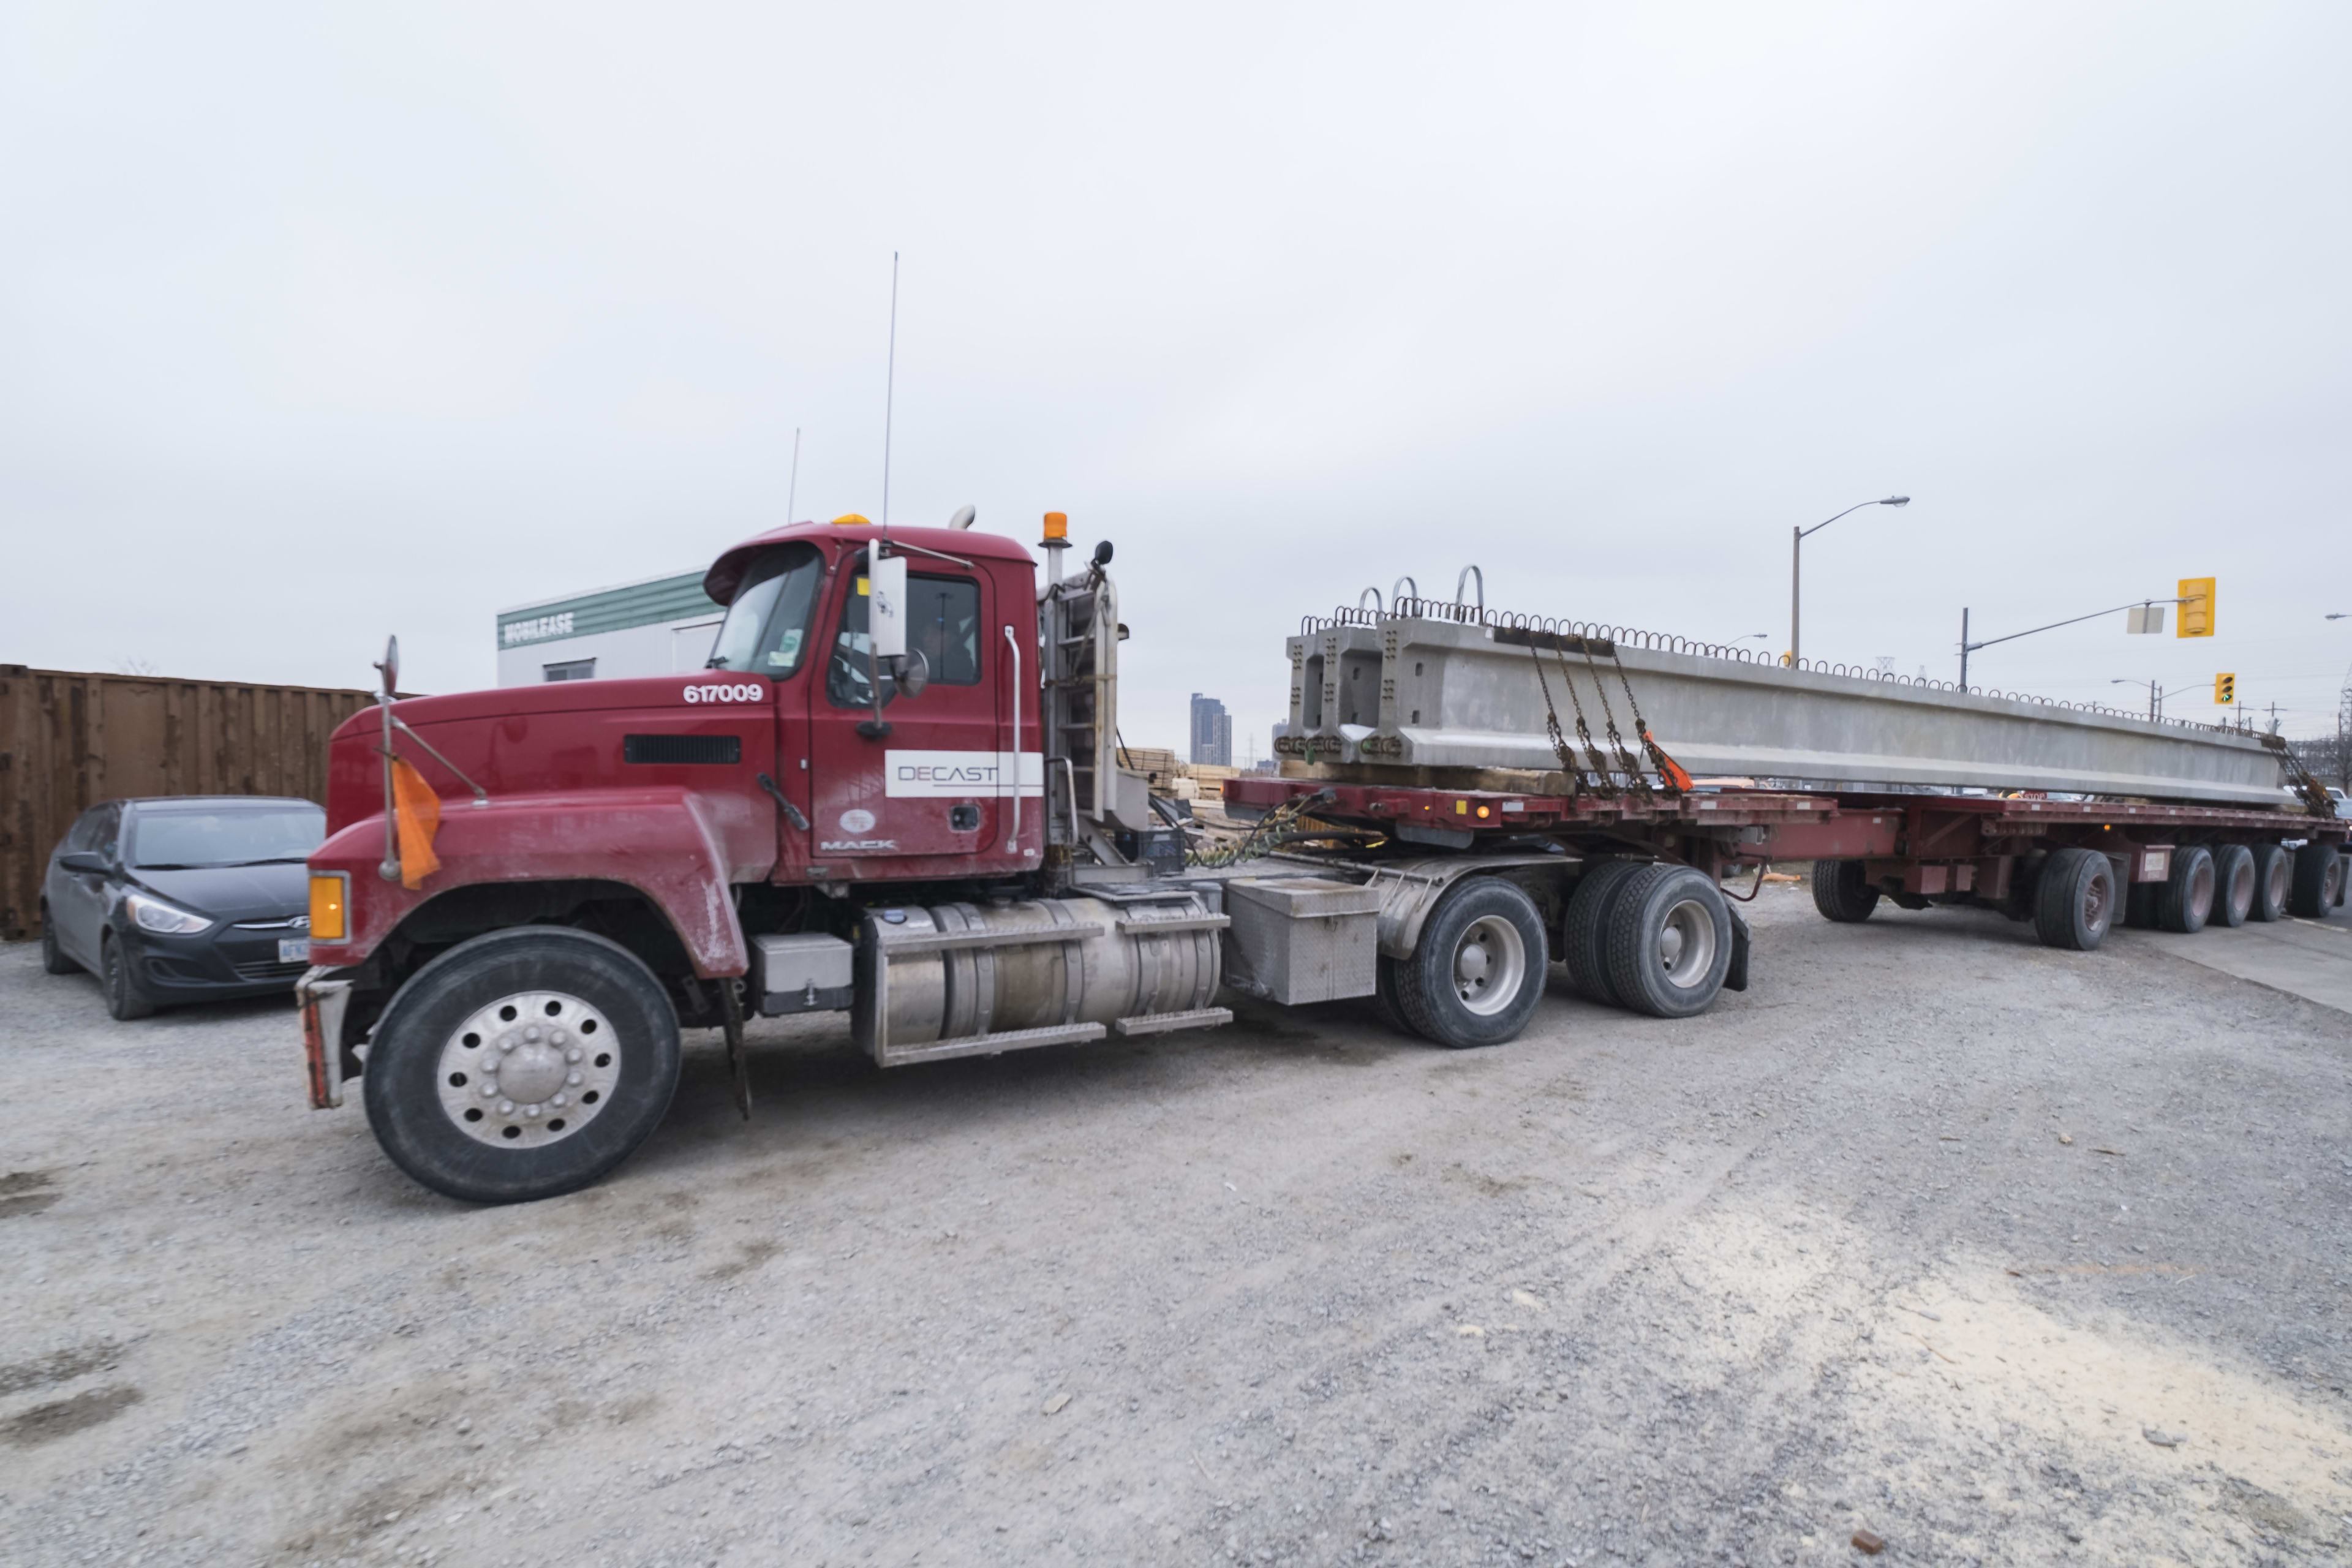 A truck hauls in large concrete girders.